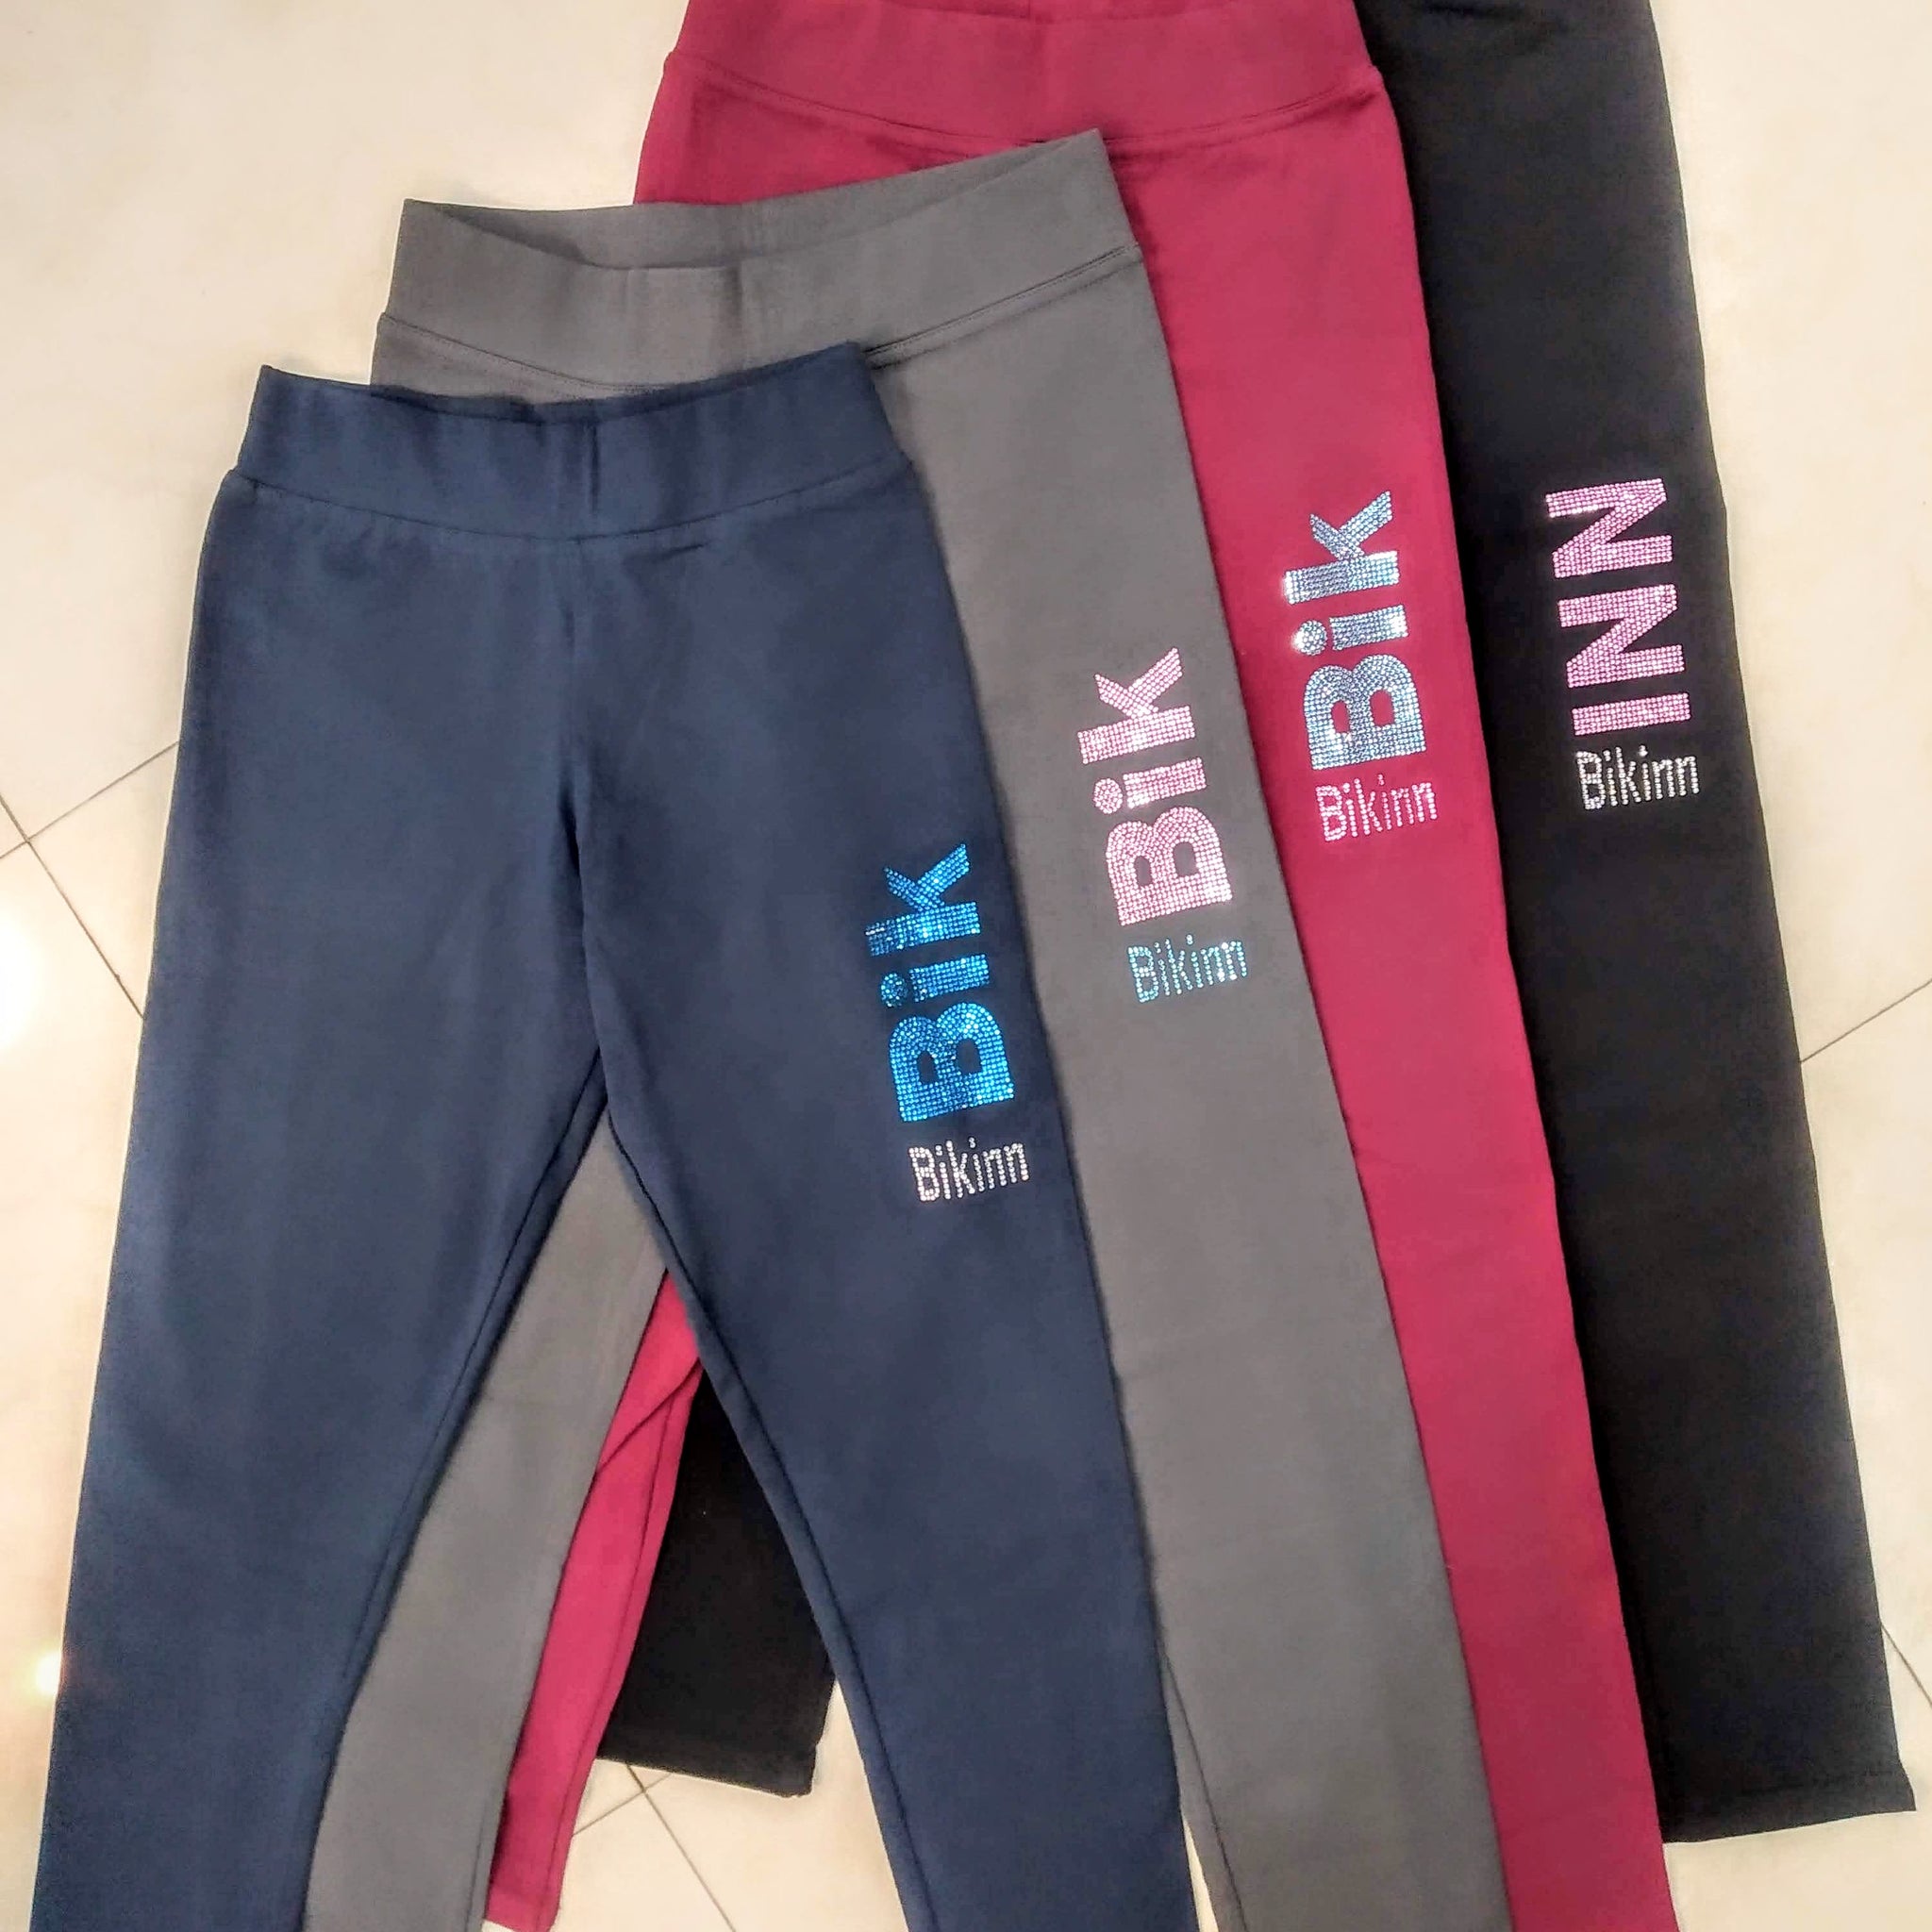 display of 4 different colors of long leggings with rhinestones crystals printed logo on left thigh, bling-bling fashion. bikinn.com